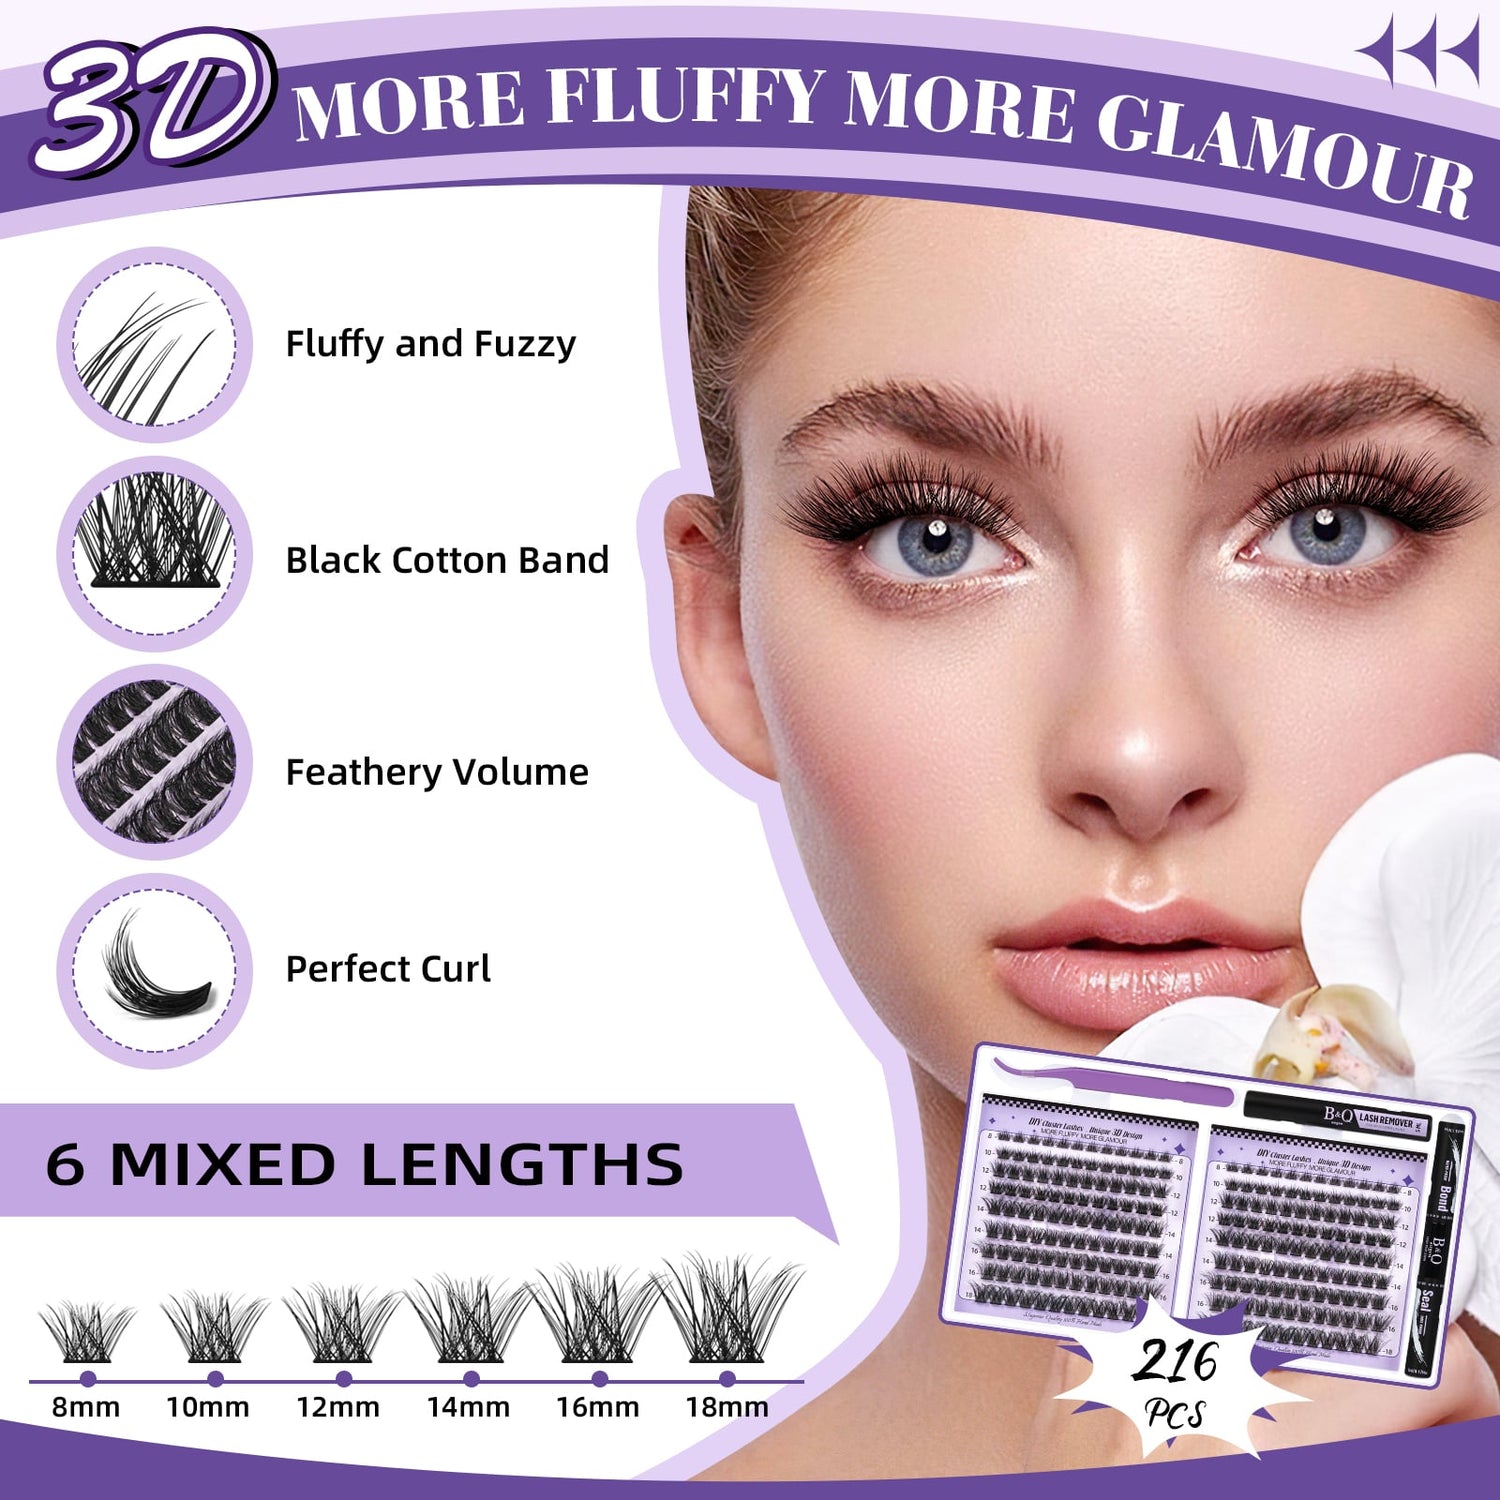 Advantages of 3D Effect DIY Cluster Lash:Fluffy and Fuzzy,perfect curl, Feathery Volume and 6 mixied lengths to choose from